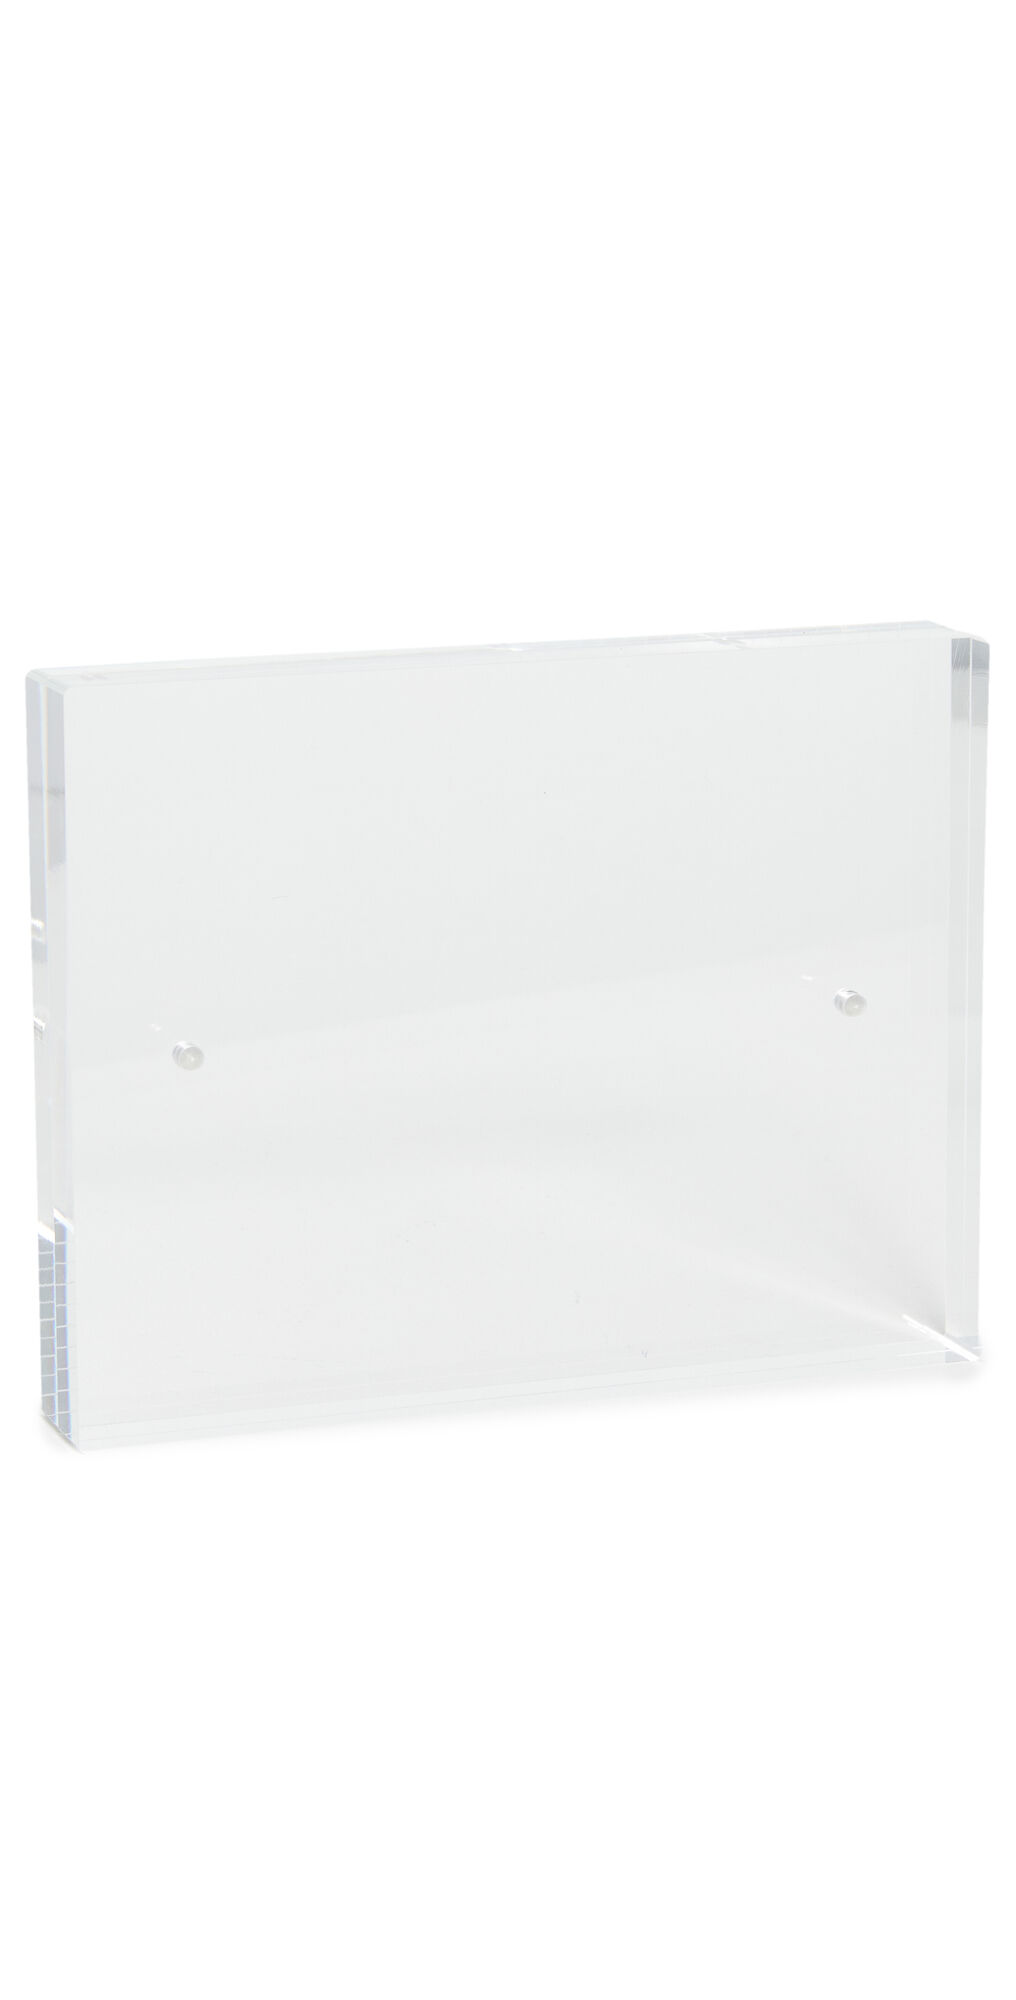 Shopbop Home Shopbop @Home Tizo Lucite Frame Clear One Size    size: